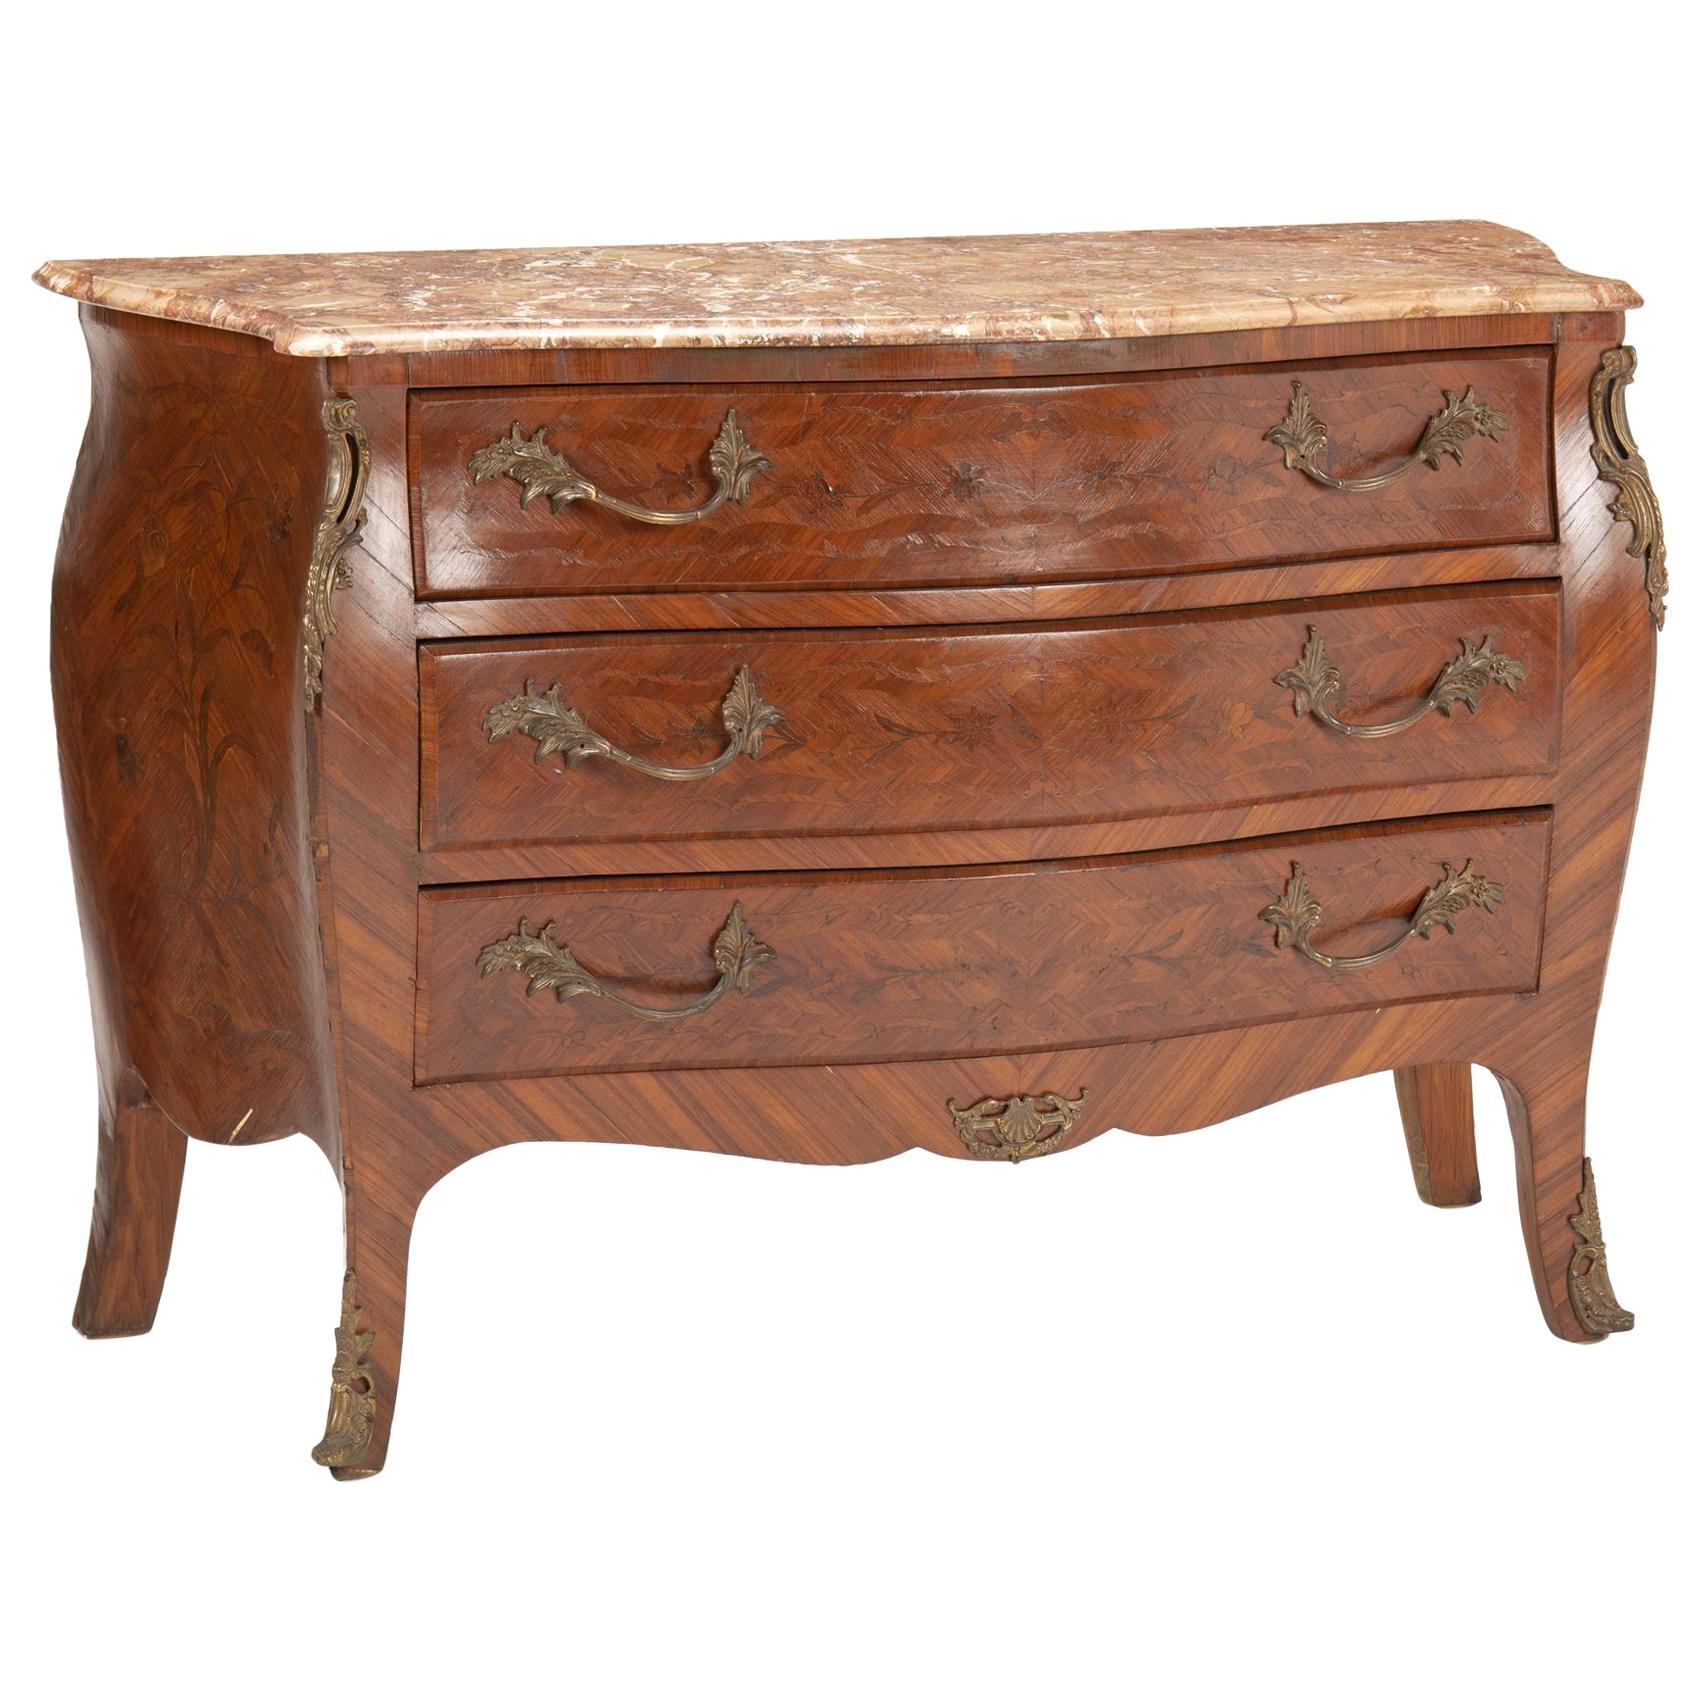 French Gilt Bronze Mounted Commode, 19th Century